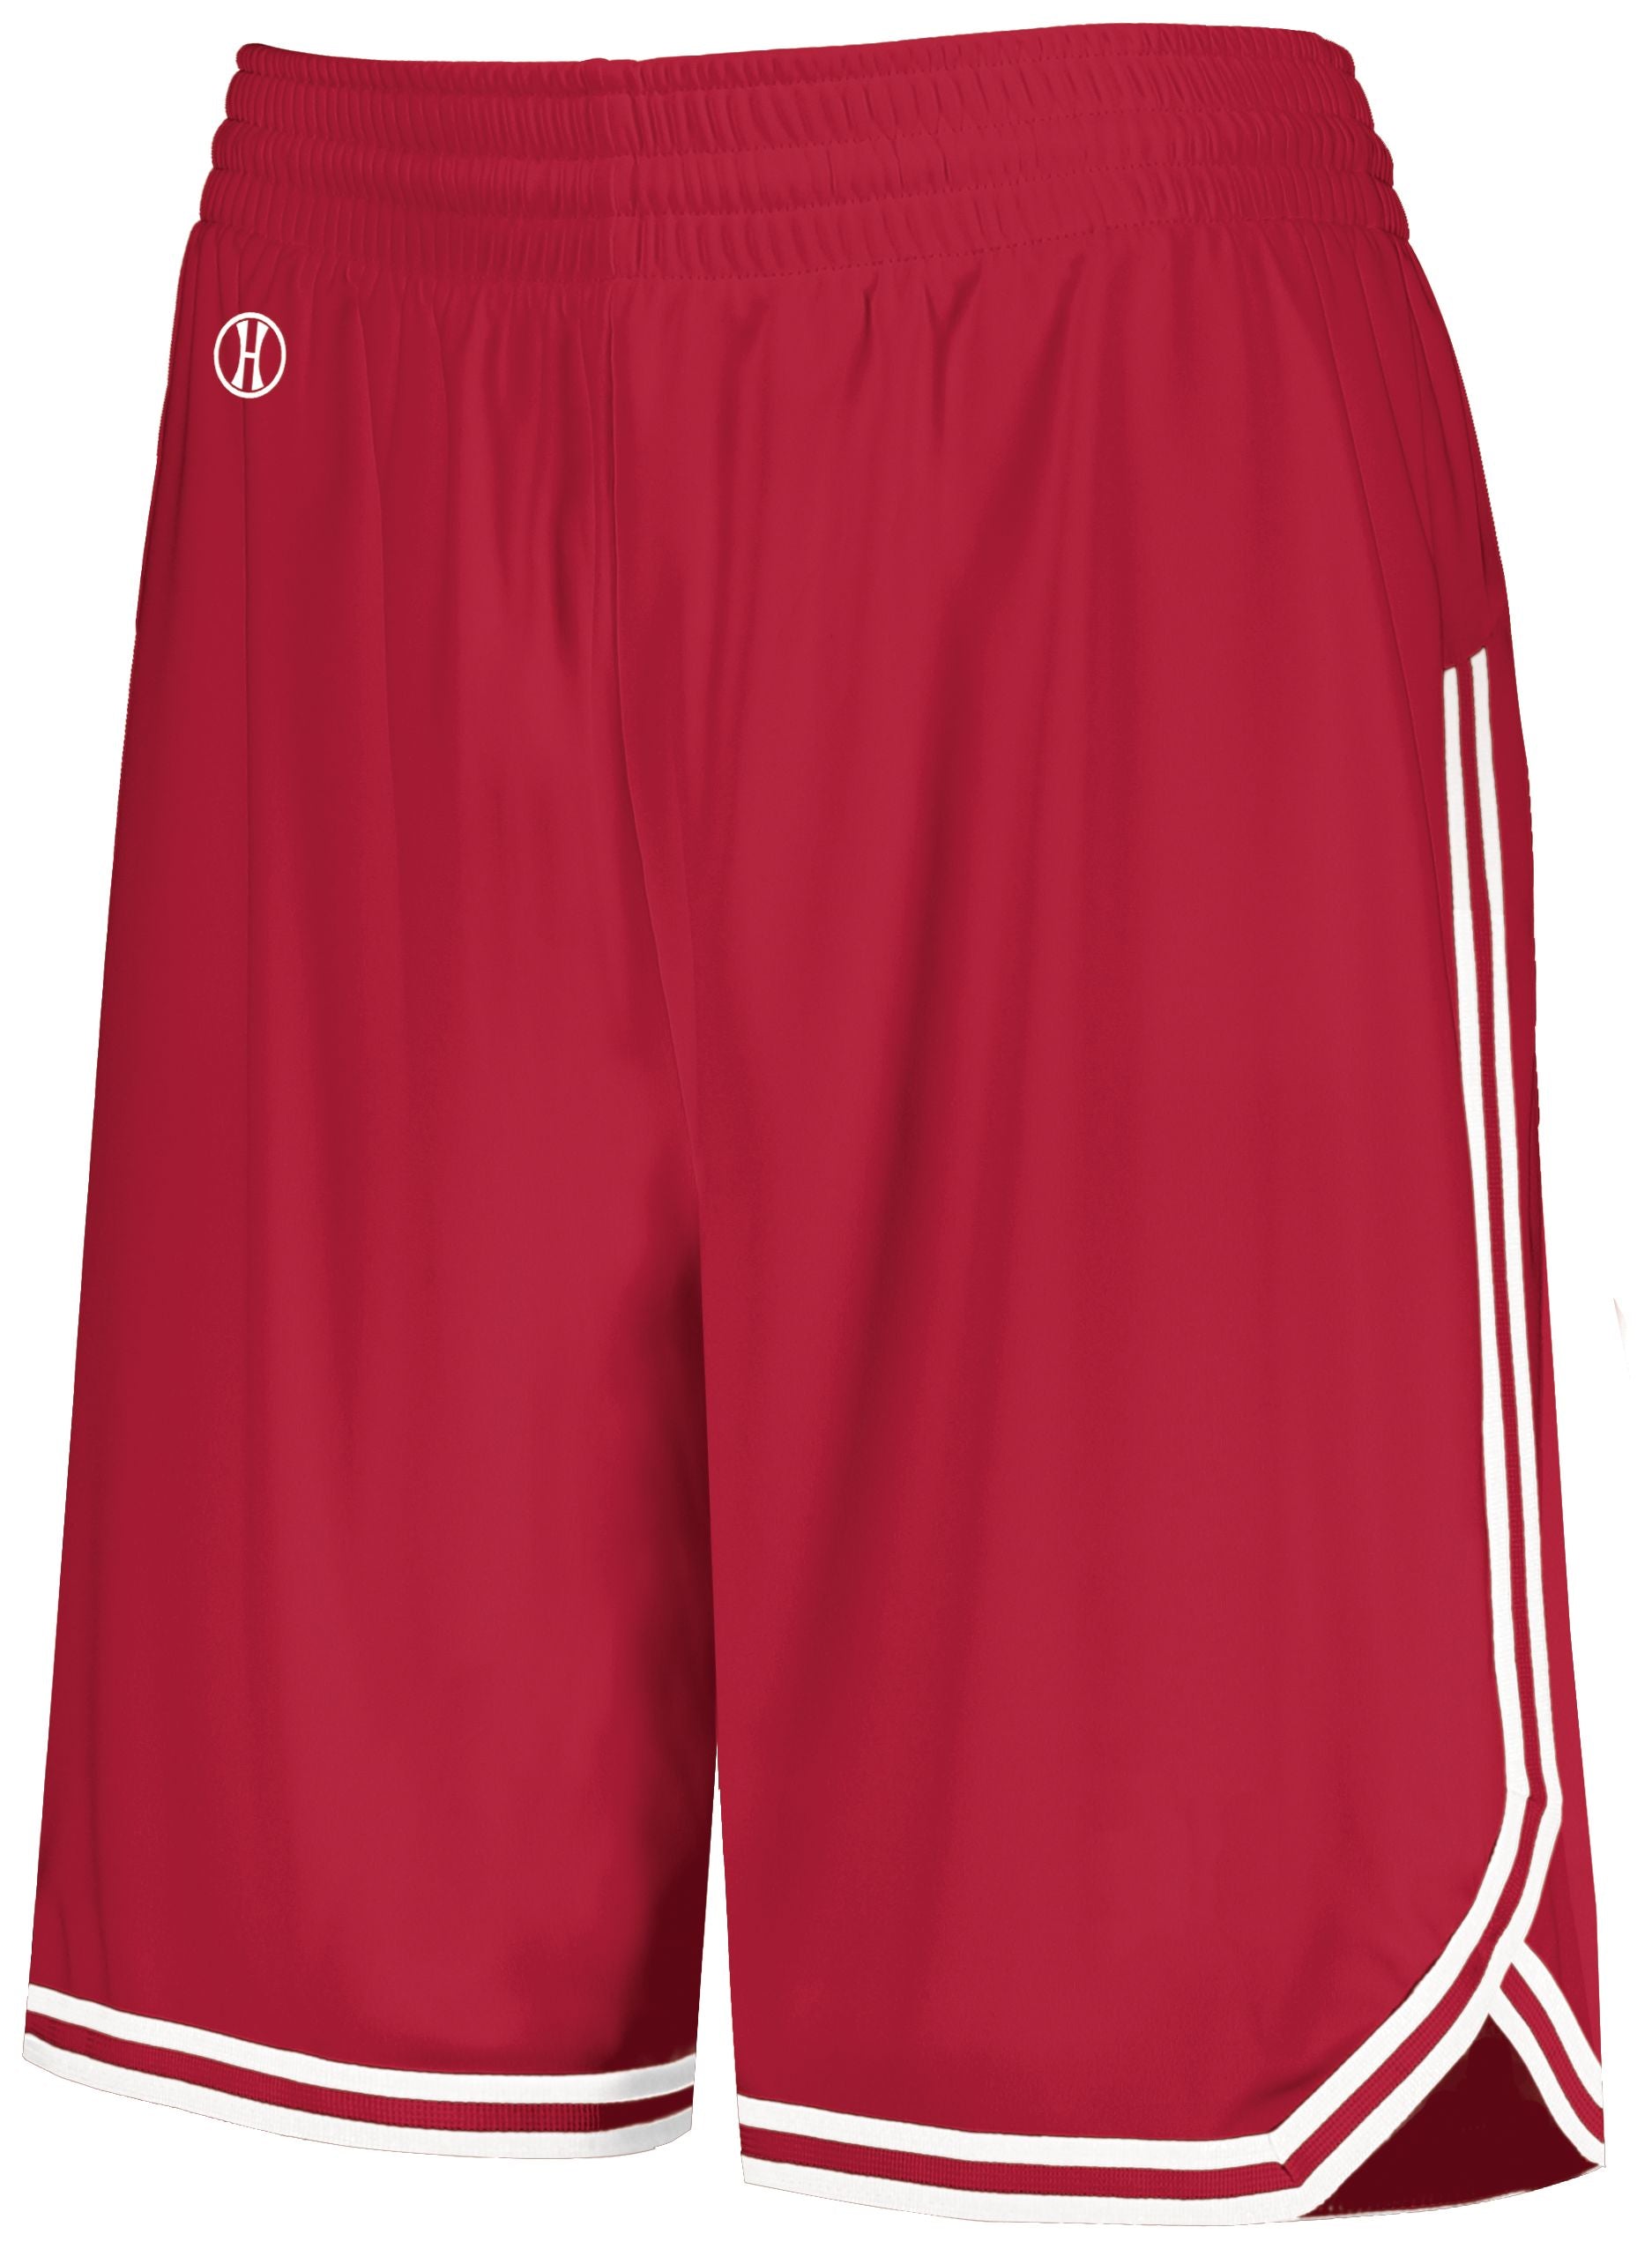 Holloway Ladies Retro Basketball Shorts in Scarlet/White  -Part of the Ladies, Ladies-Shorts, Basketball, Holloway, All-Sports, All-Sports-1 product lines at KanaleyCreations.com